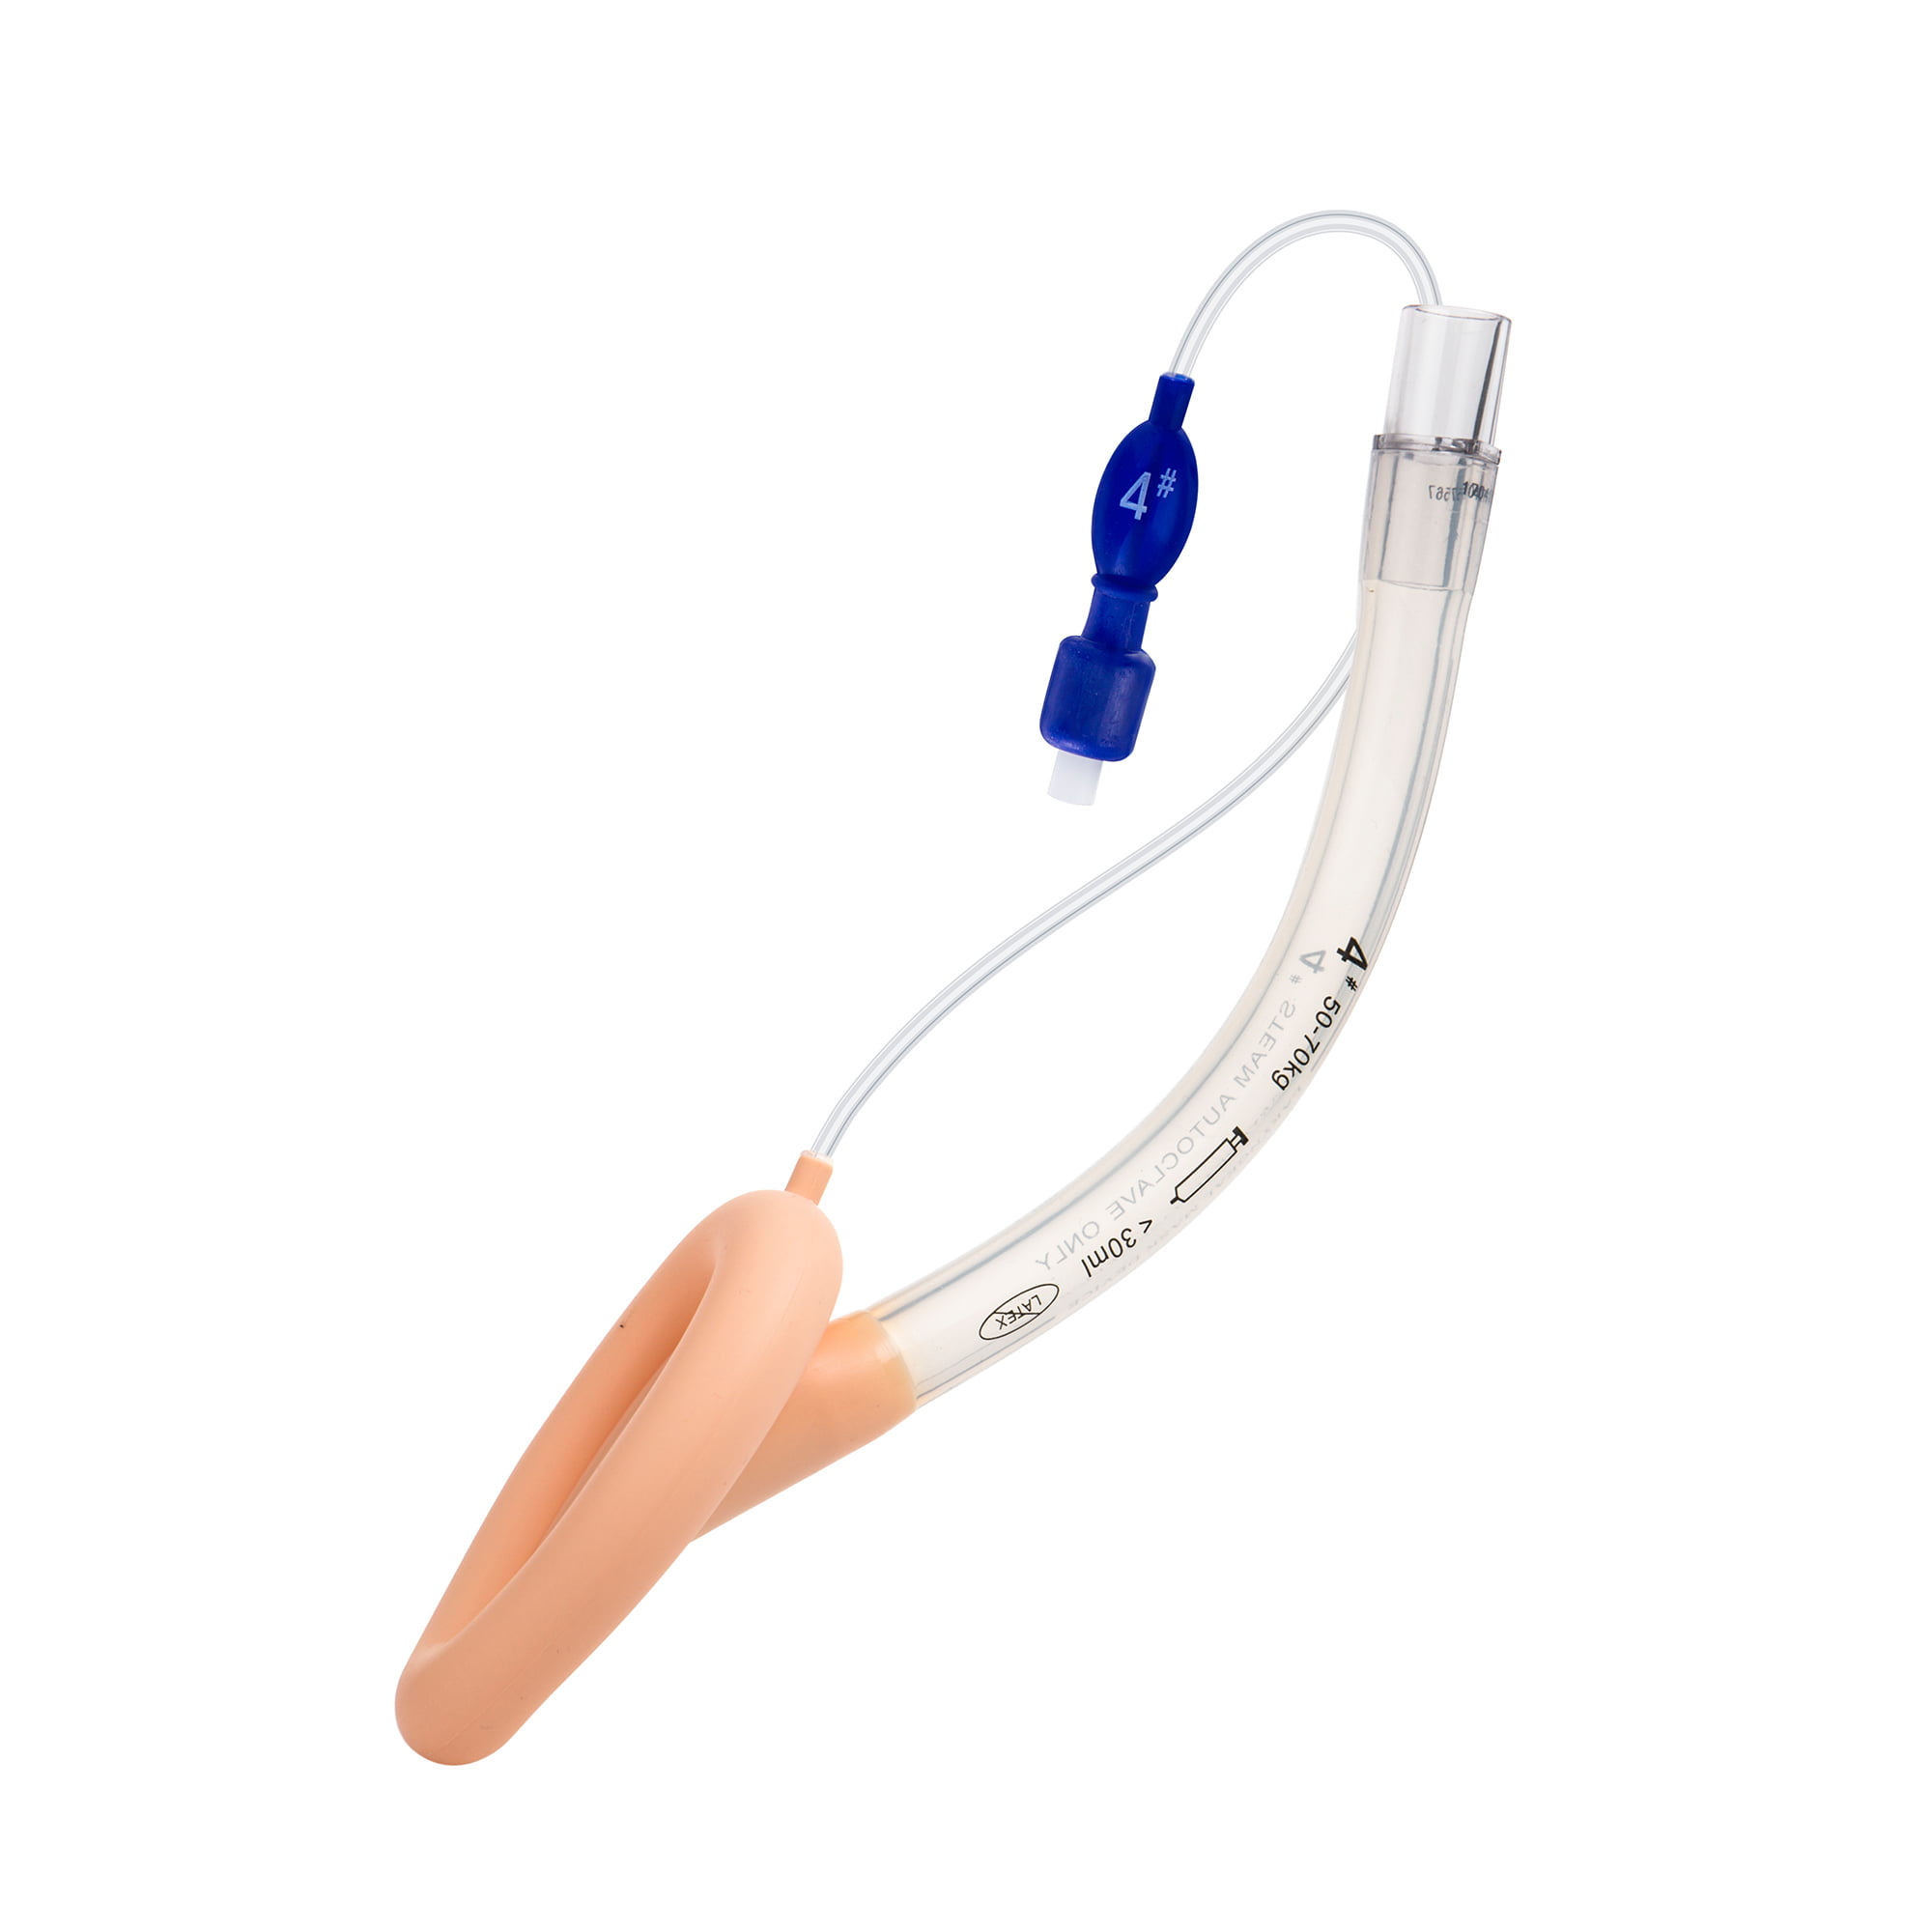 Reusable Silicone Laryngeal Mask